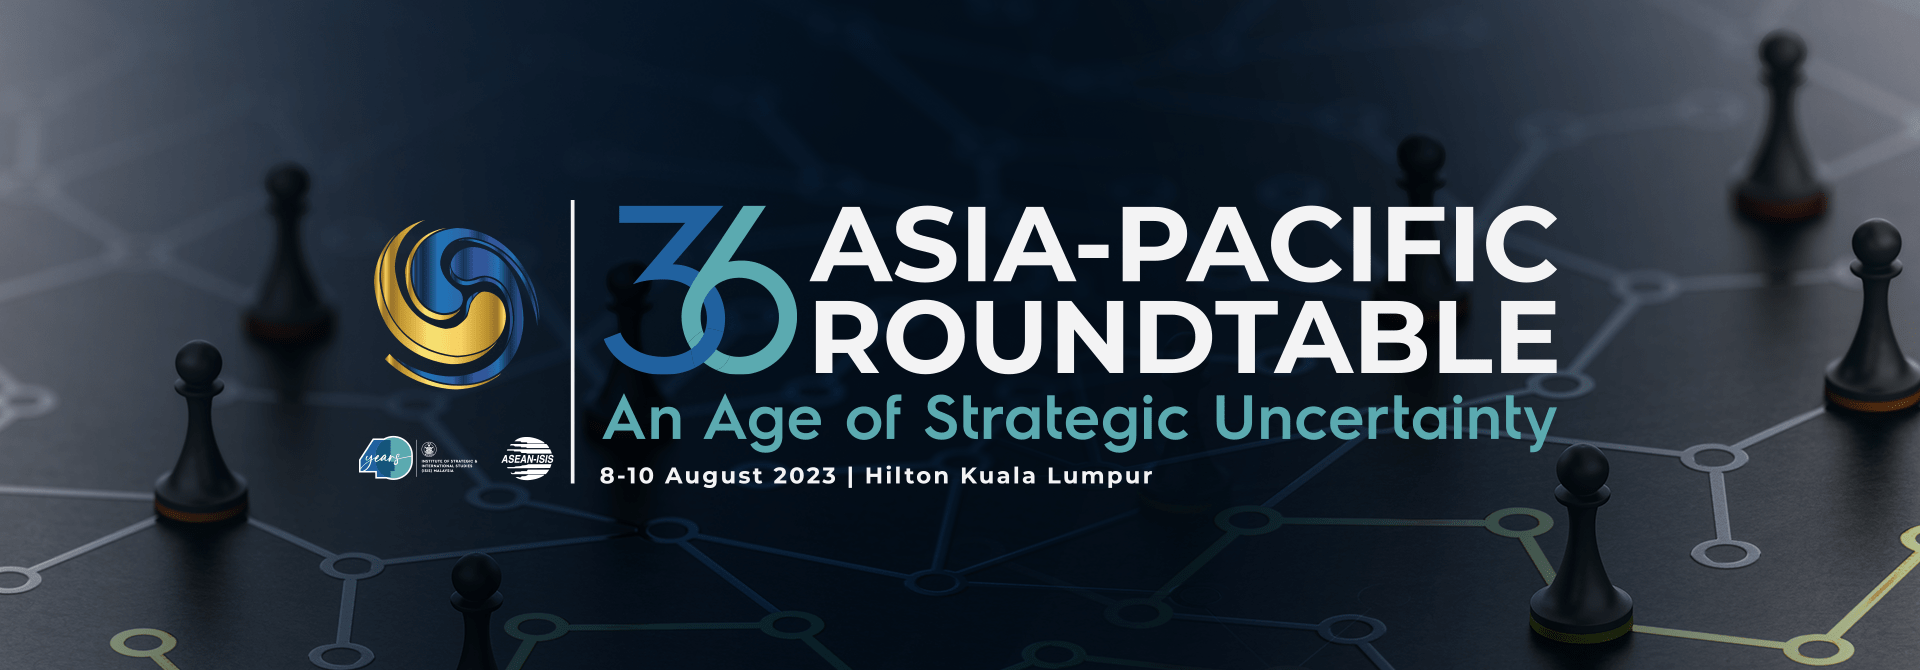 36th Asia-Pacific Roundtable: An Age of Strategic Uncertainty